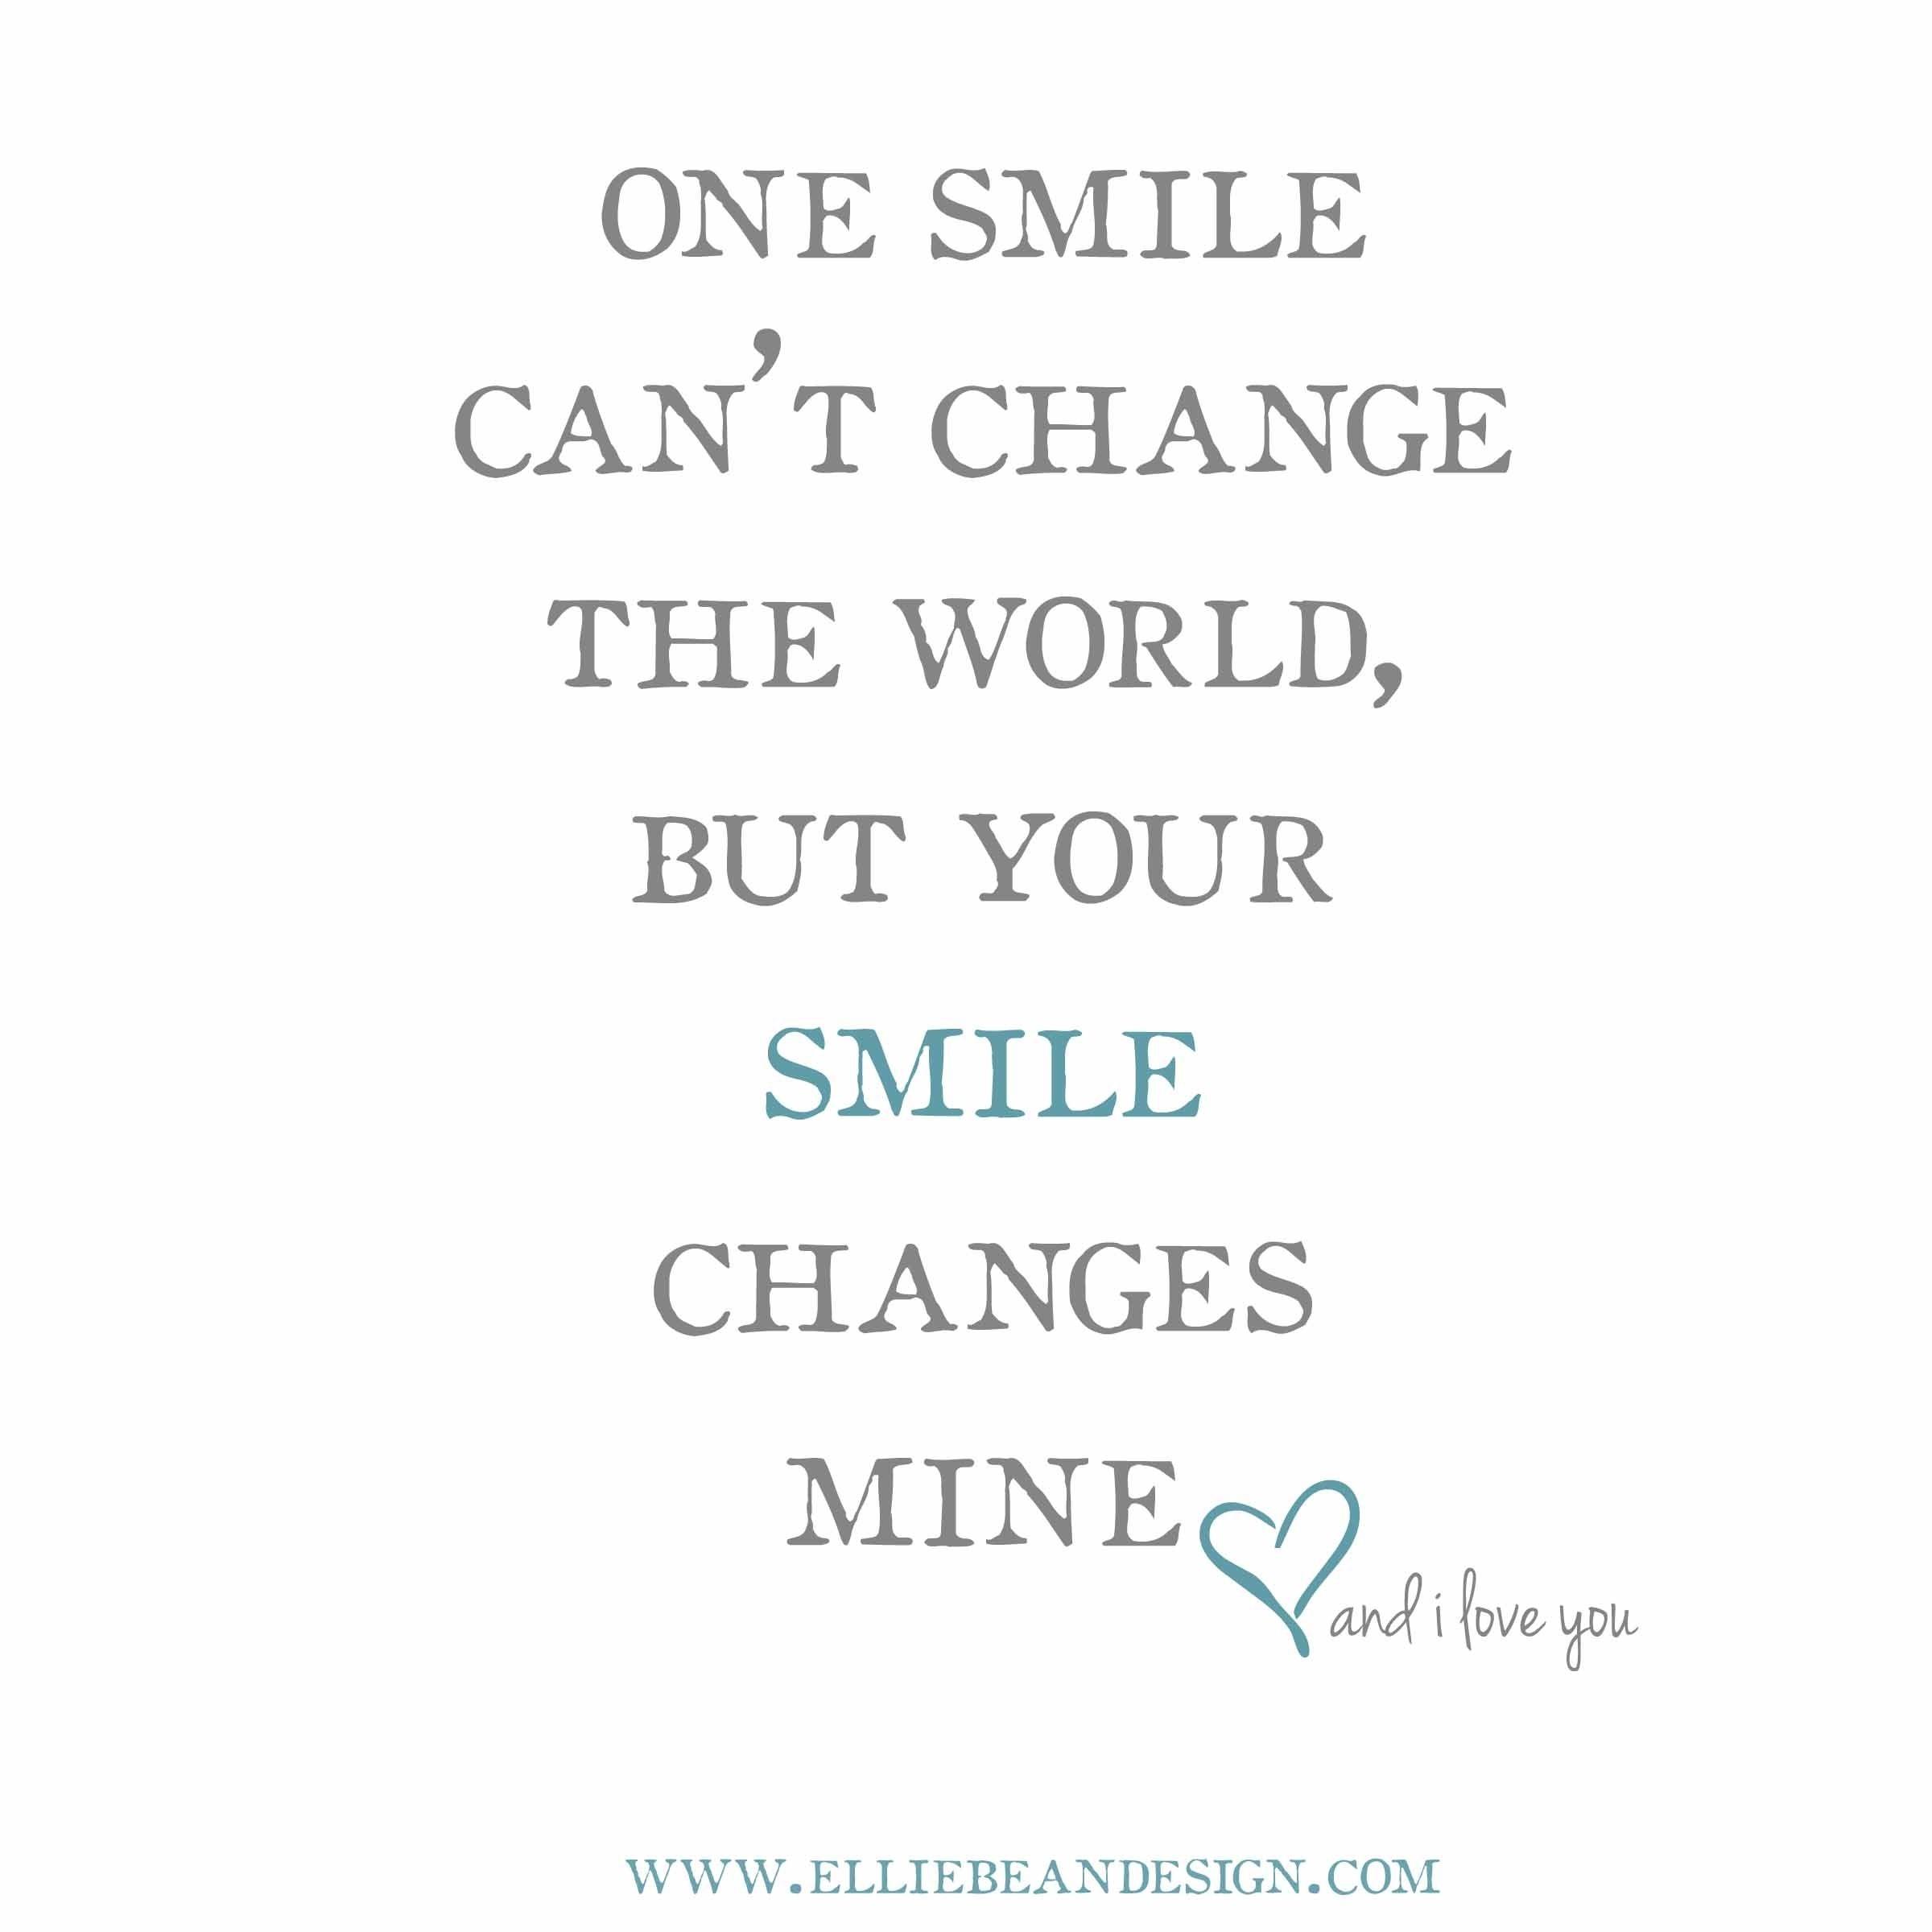 Smile Quotes Wallpapers - Wallpaper Cave
 Quotes About Missing Her Smile